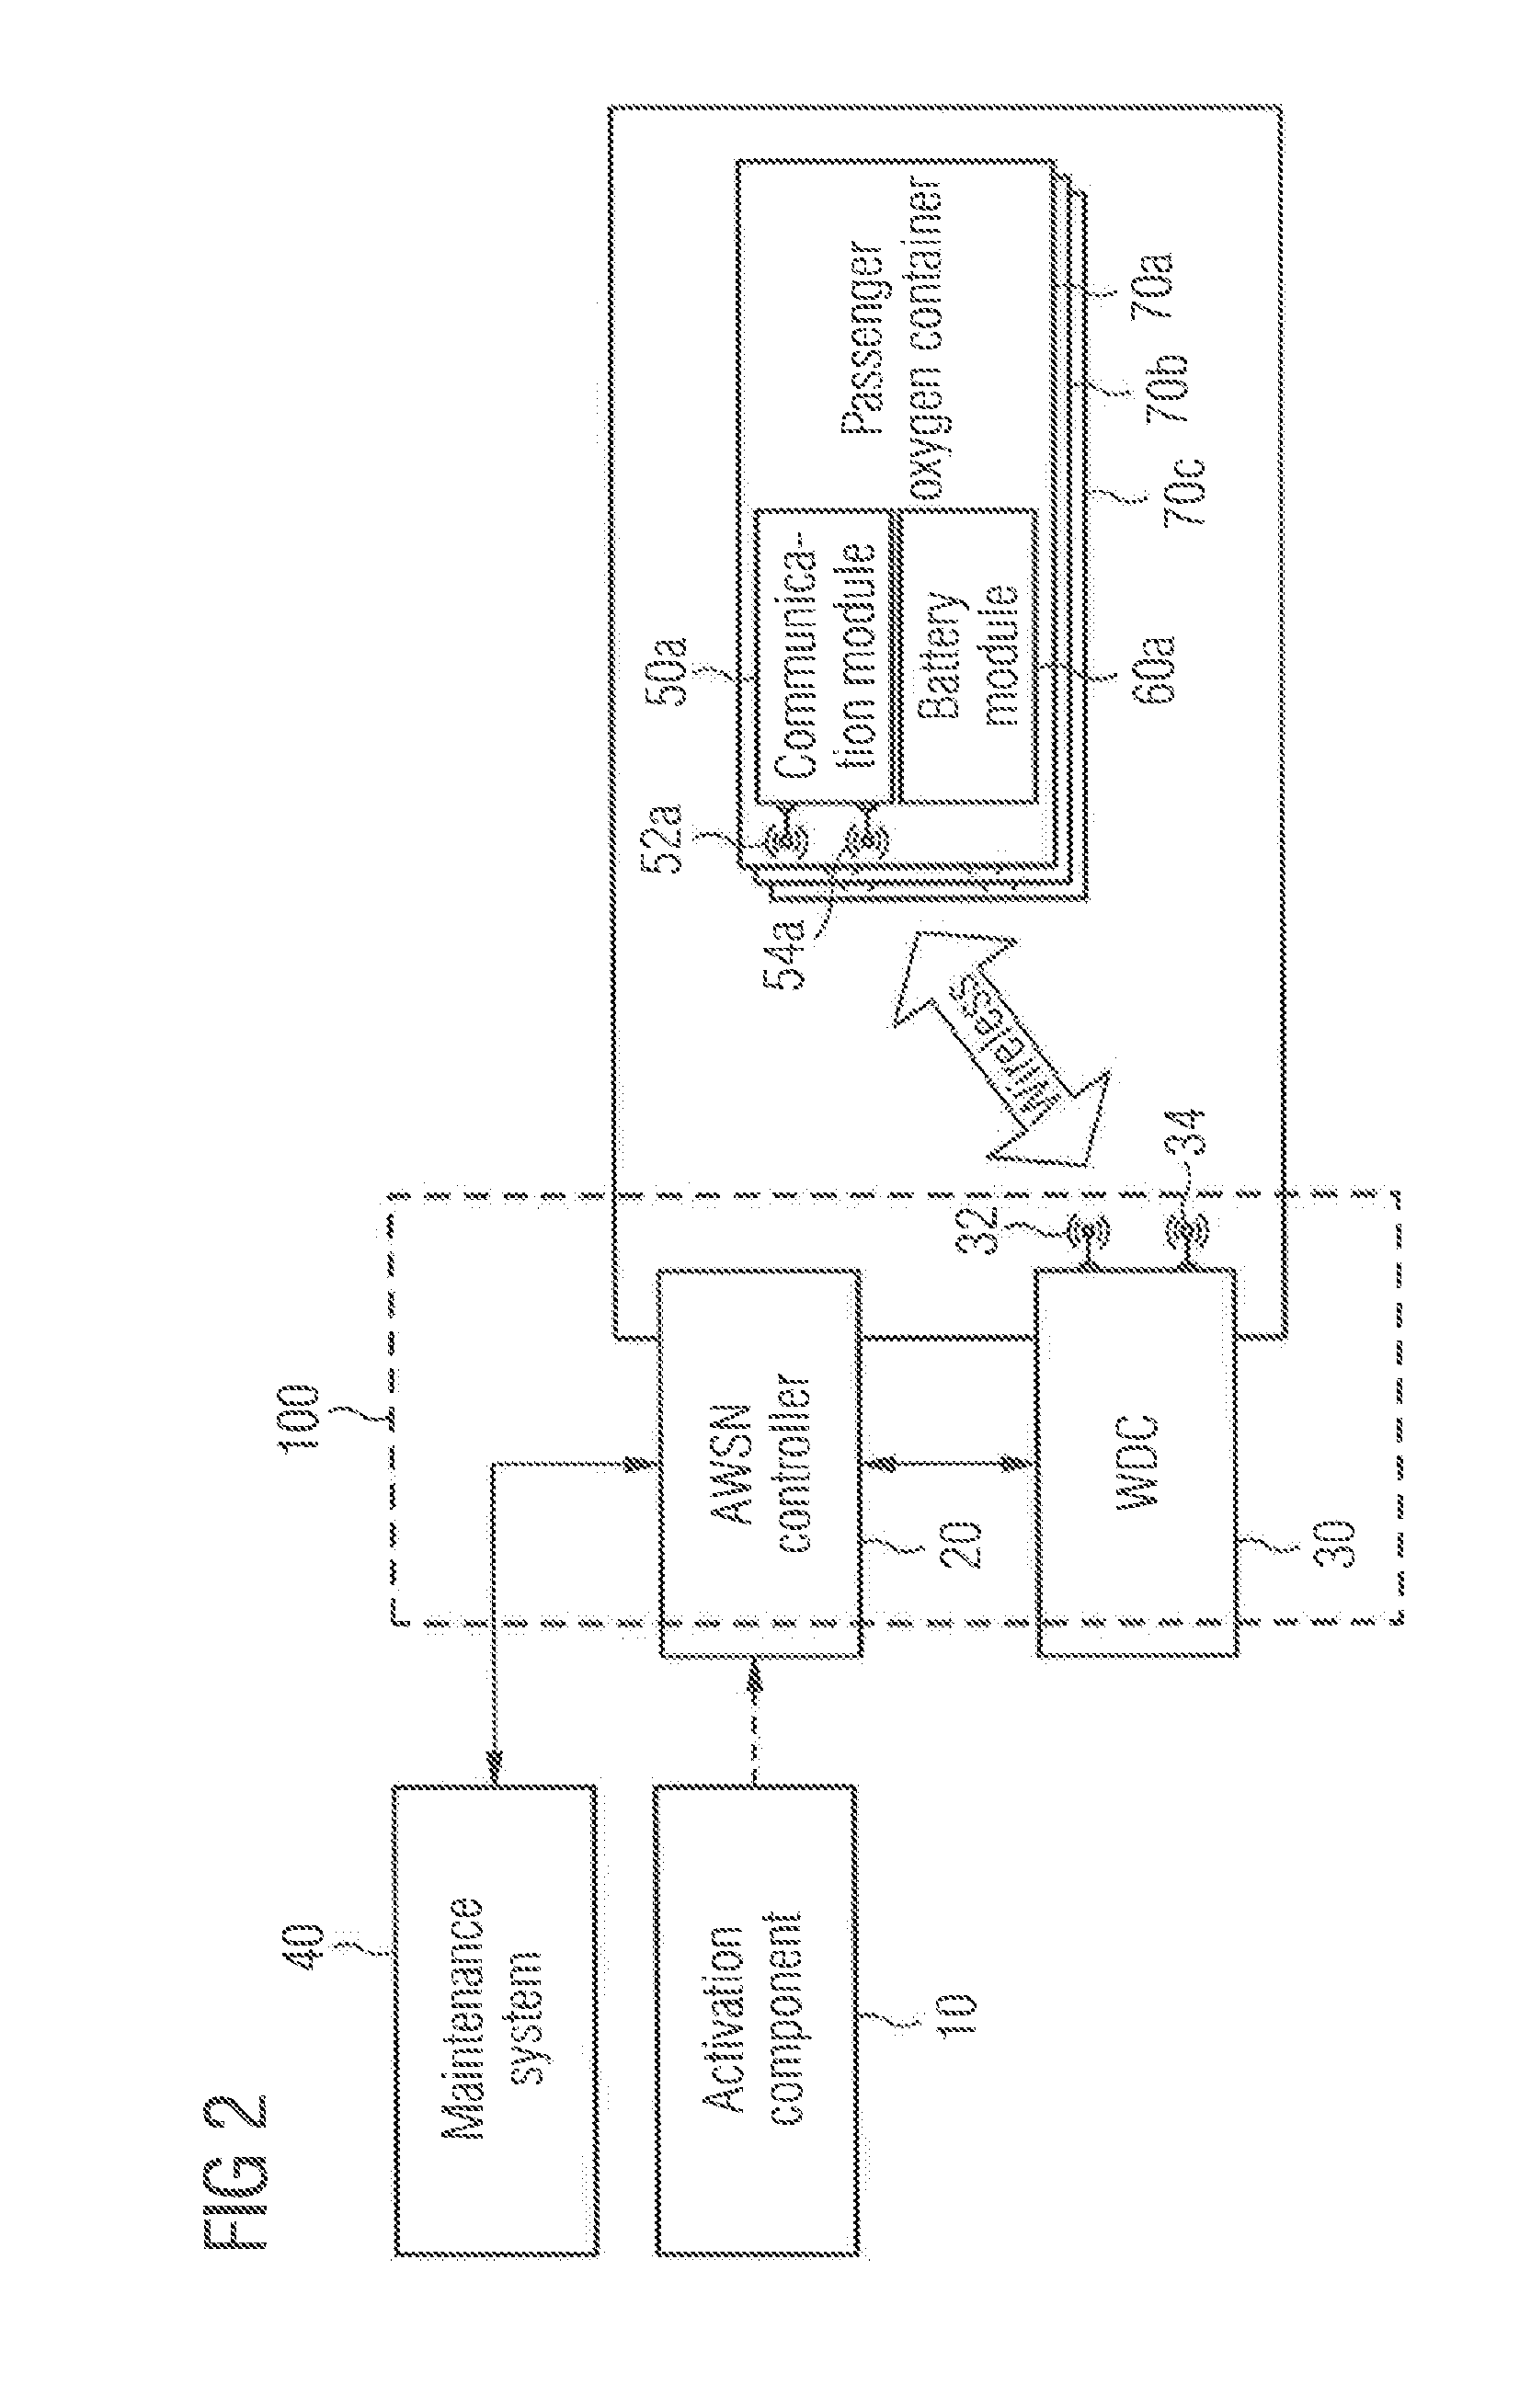 Wireless network for controlling the oxygen system of an aircraft